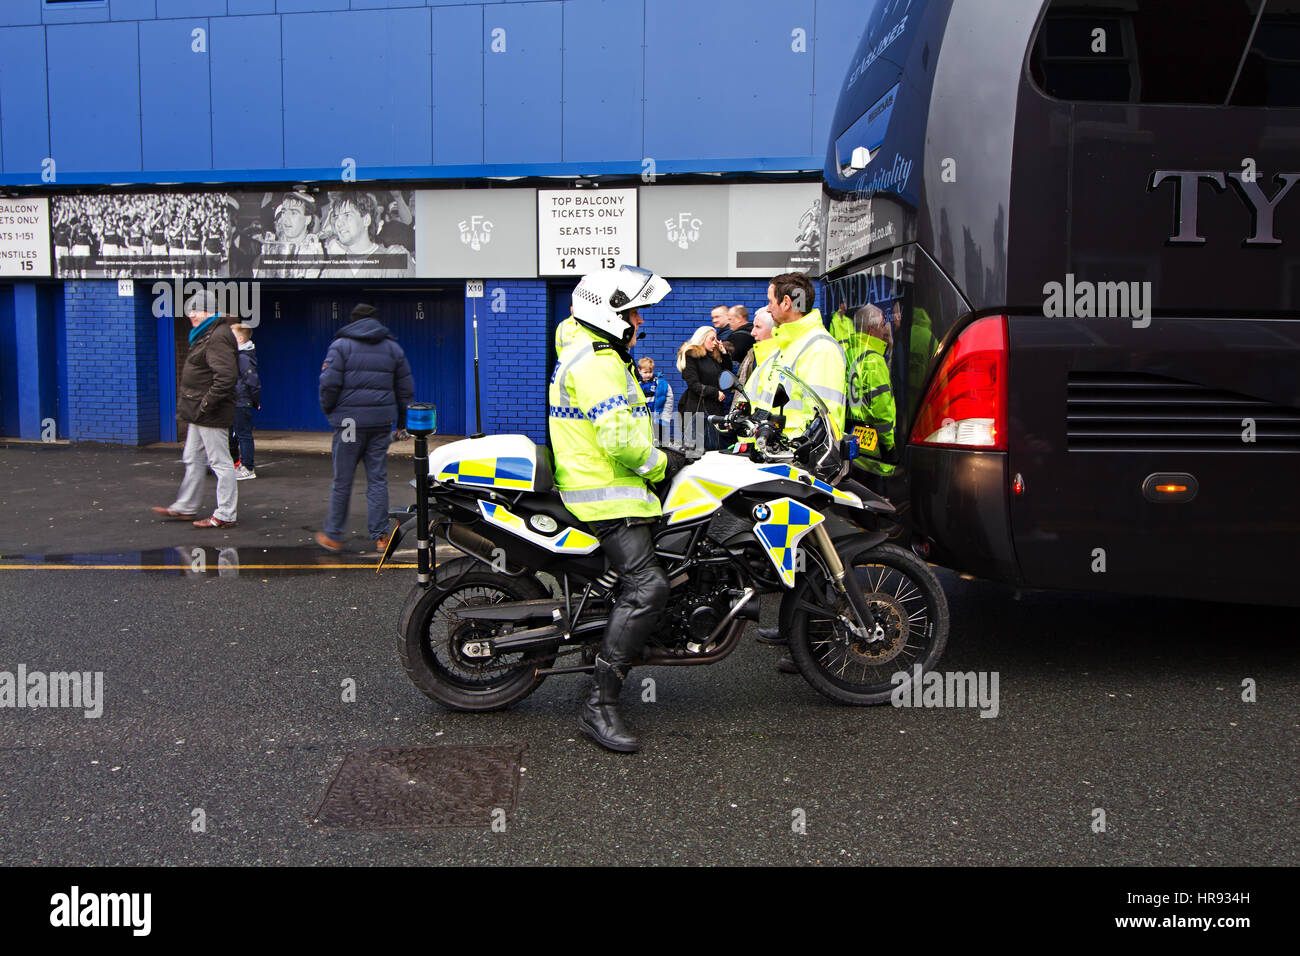 Police officers on crowd control duty as fans start to arrive at Goodison Park for Everton's home match against Sunderland, Liverpool UK. Stock Photo